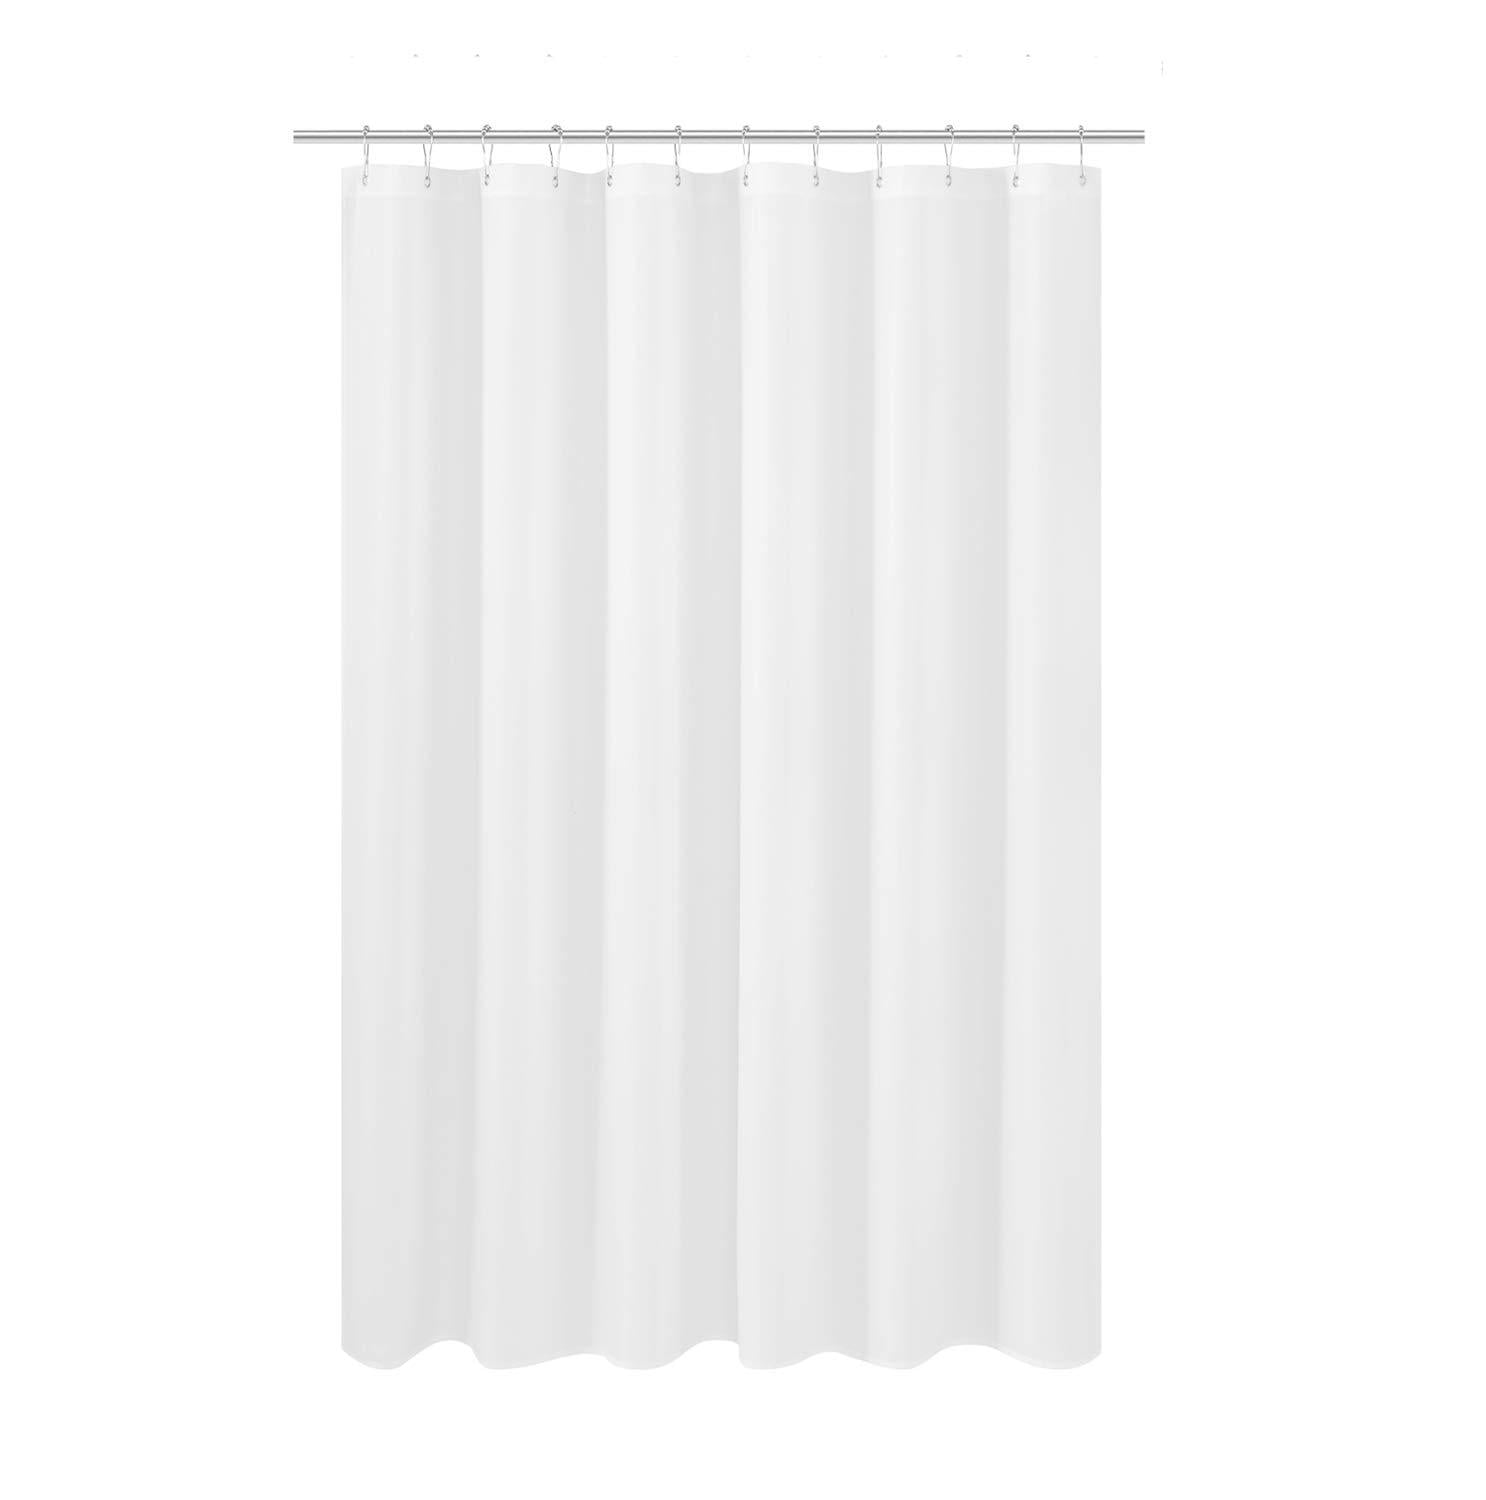 Ma Details about   N&Y HOME Fabric Shower Curtain Liner Solid White with Magnets Hotel Quality 